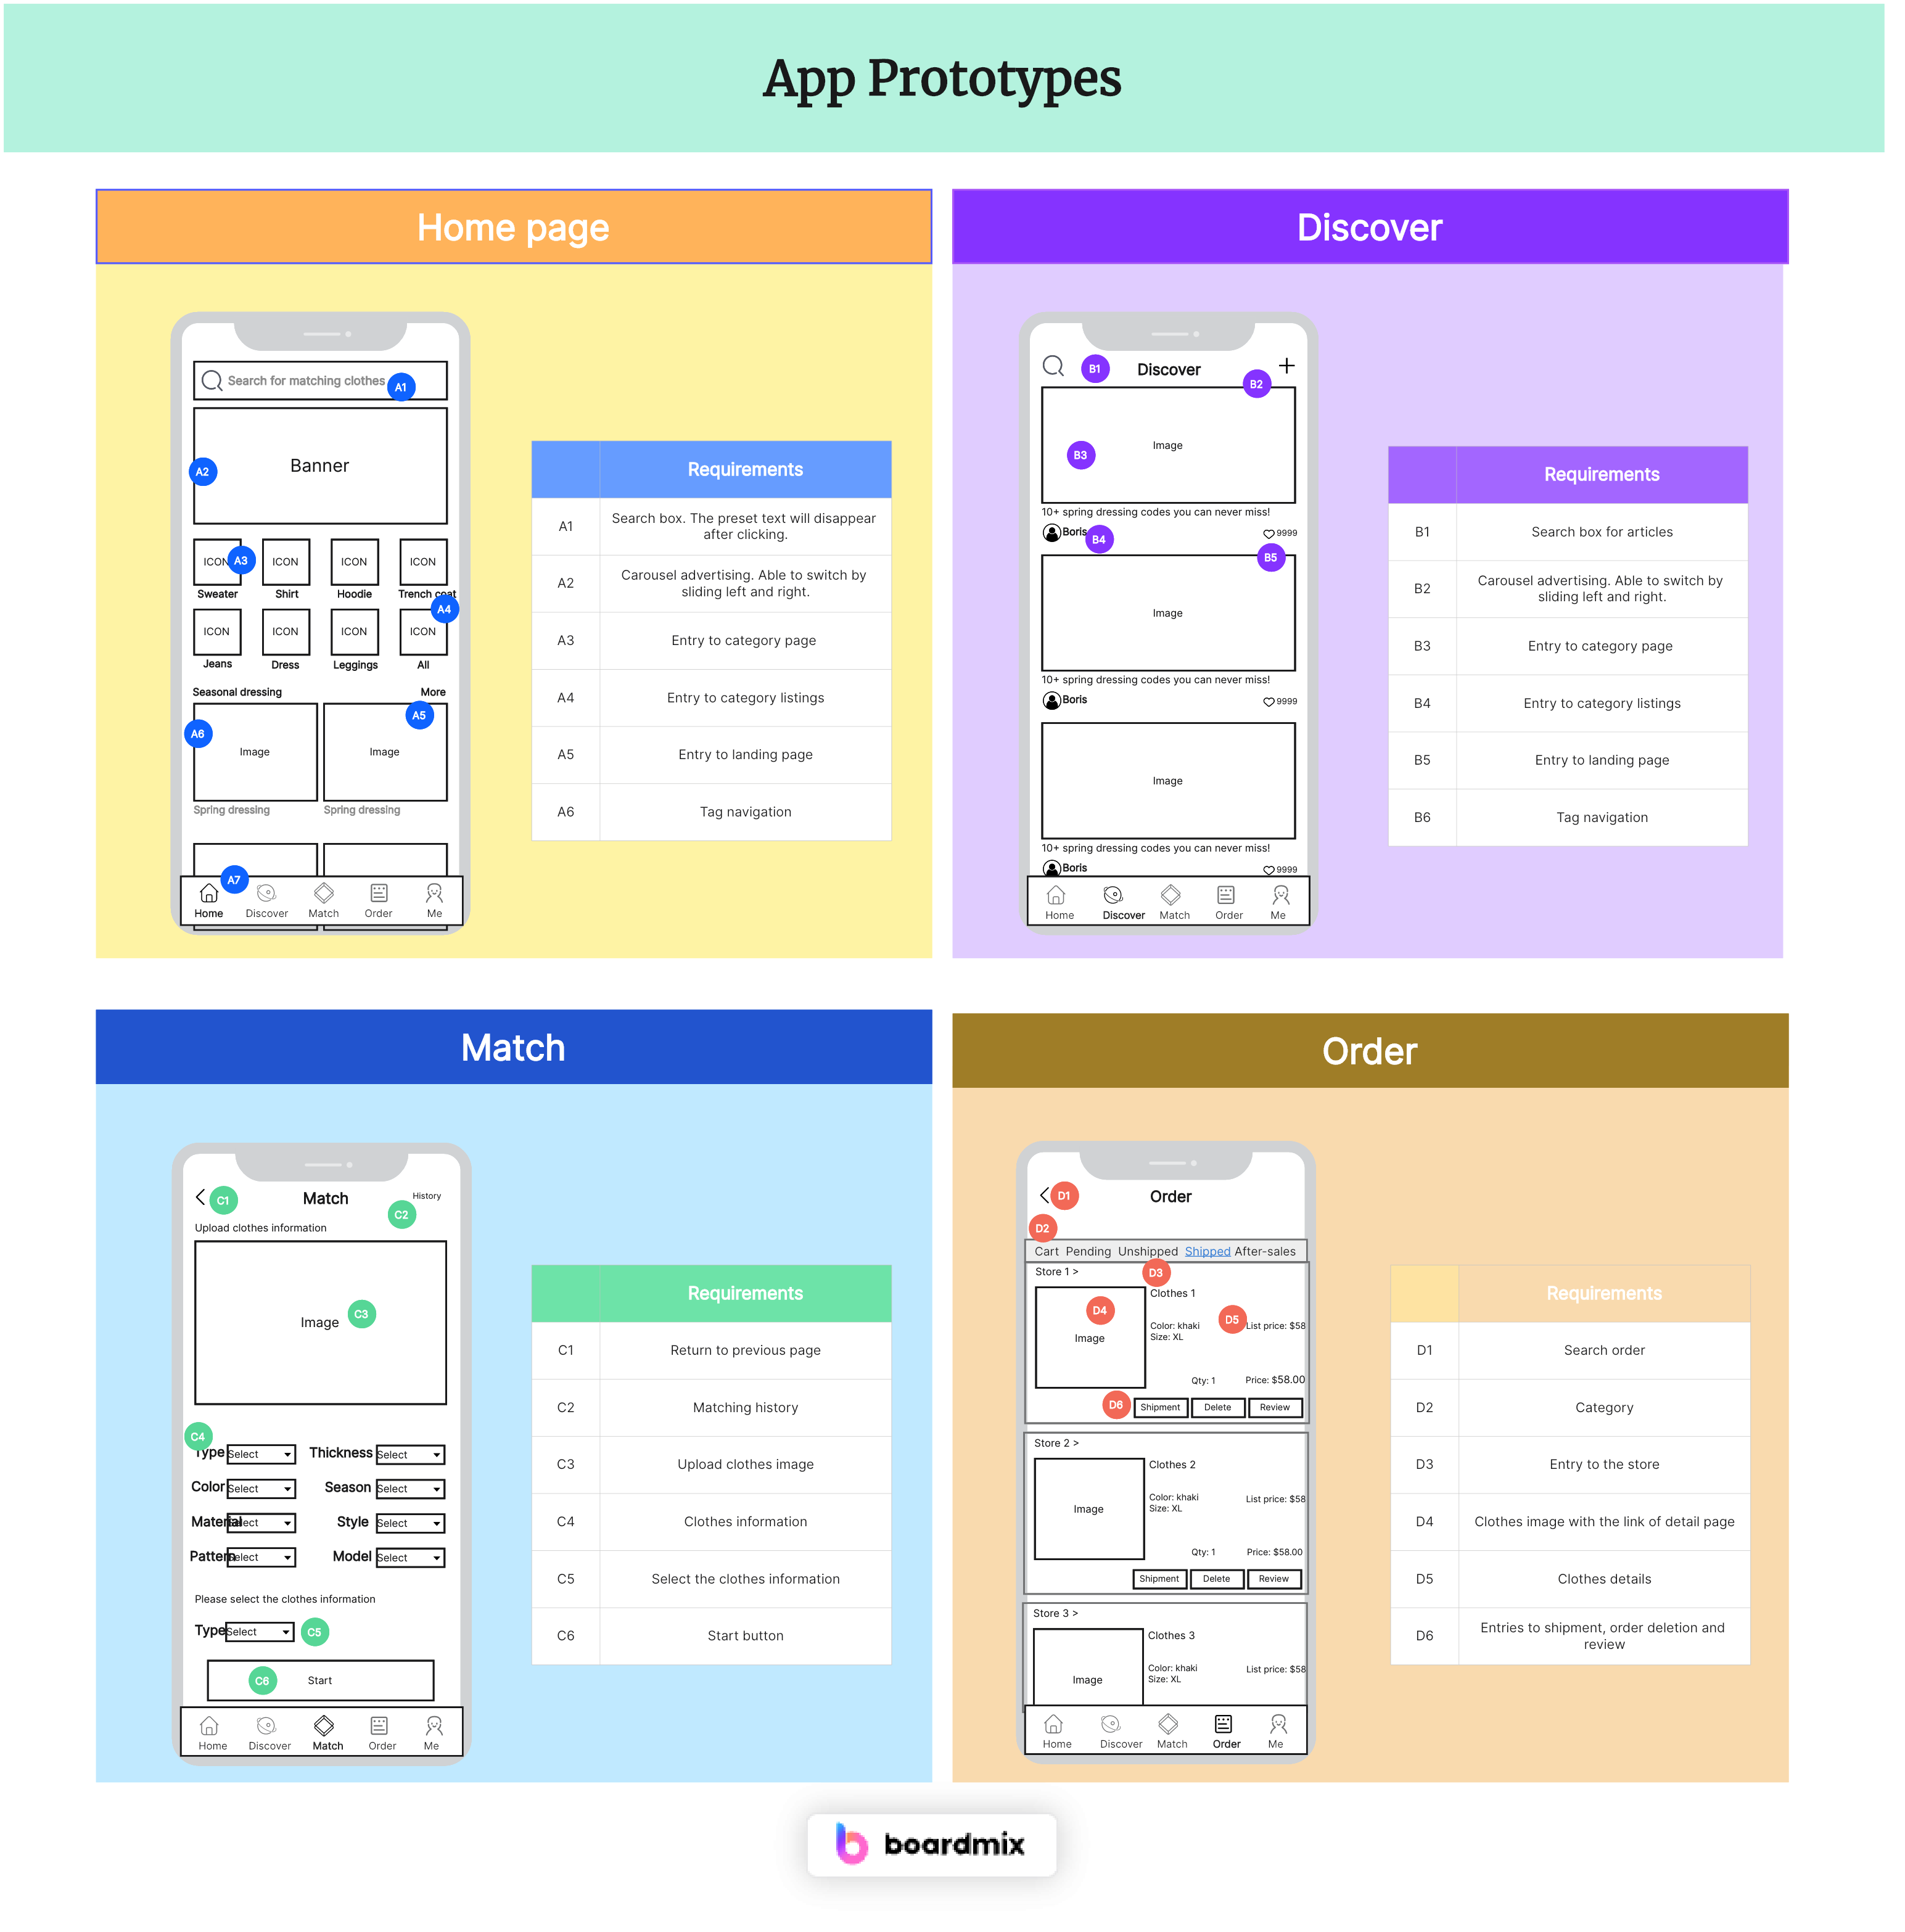 Complete Introduction to App Prototypes